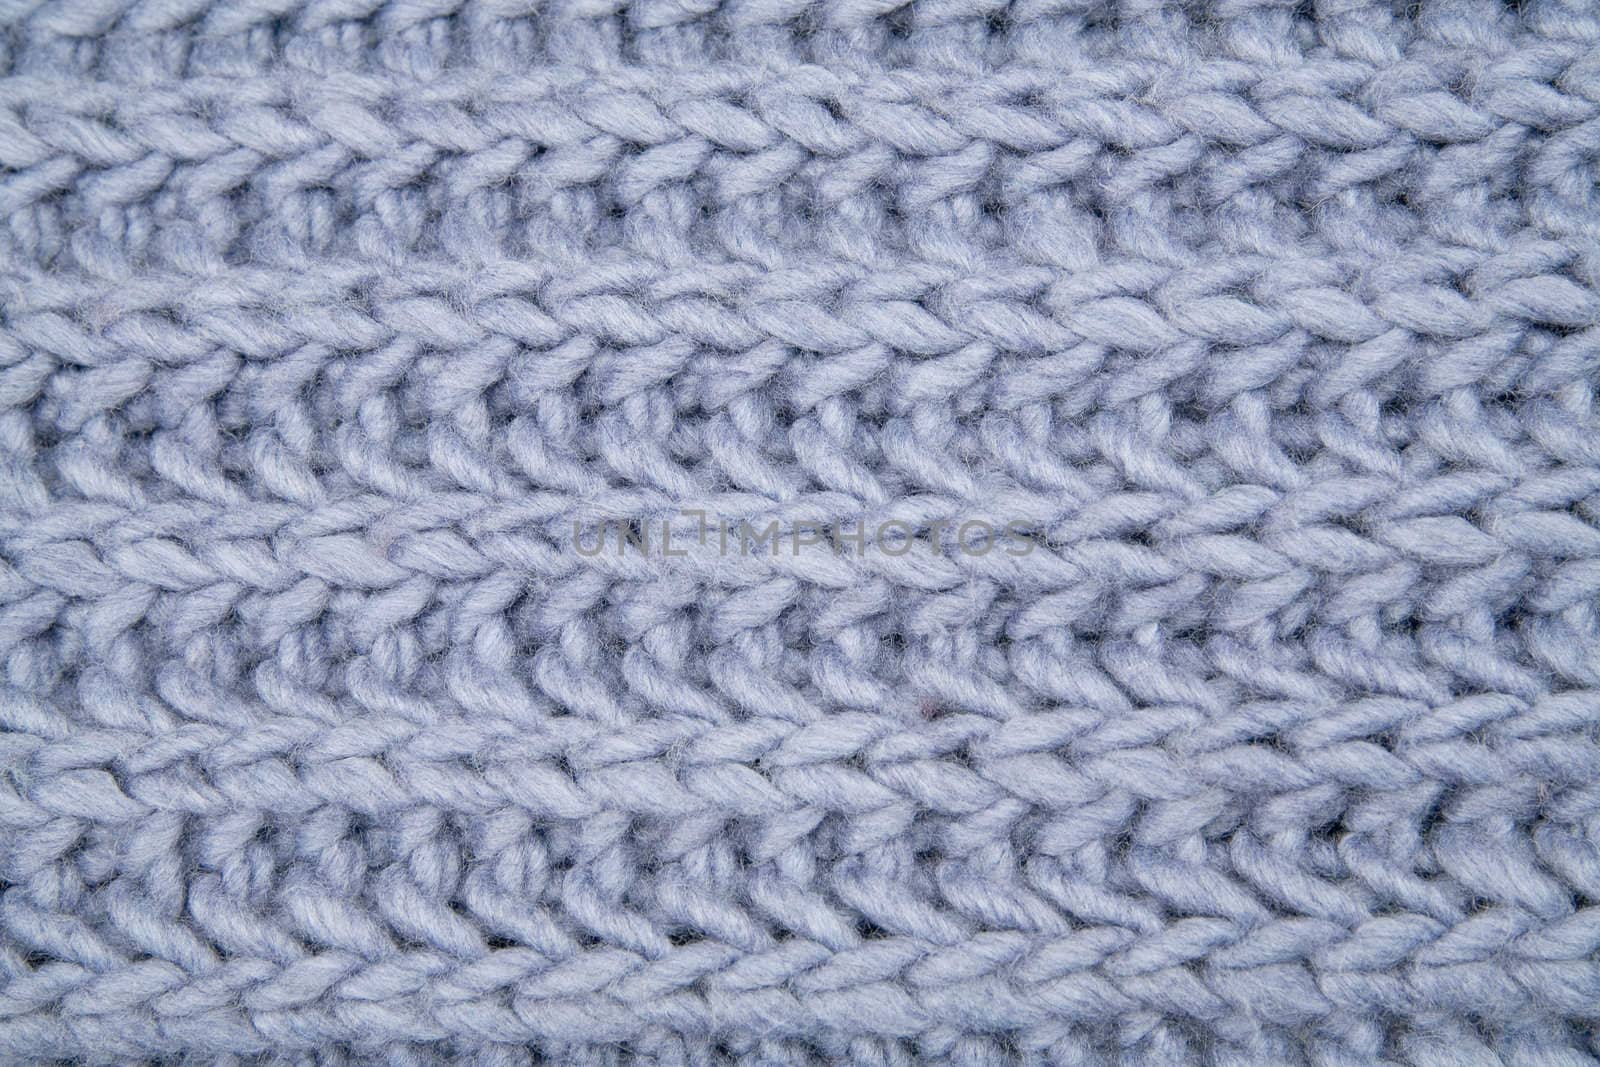 knitted material by Serp